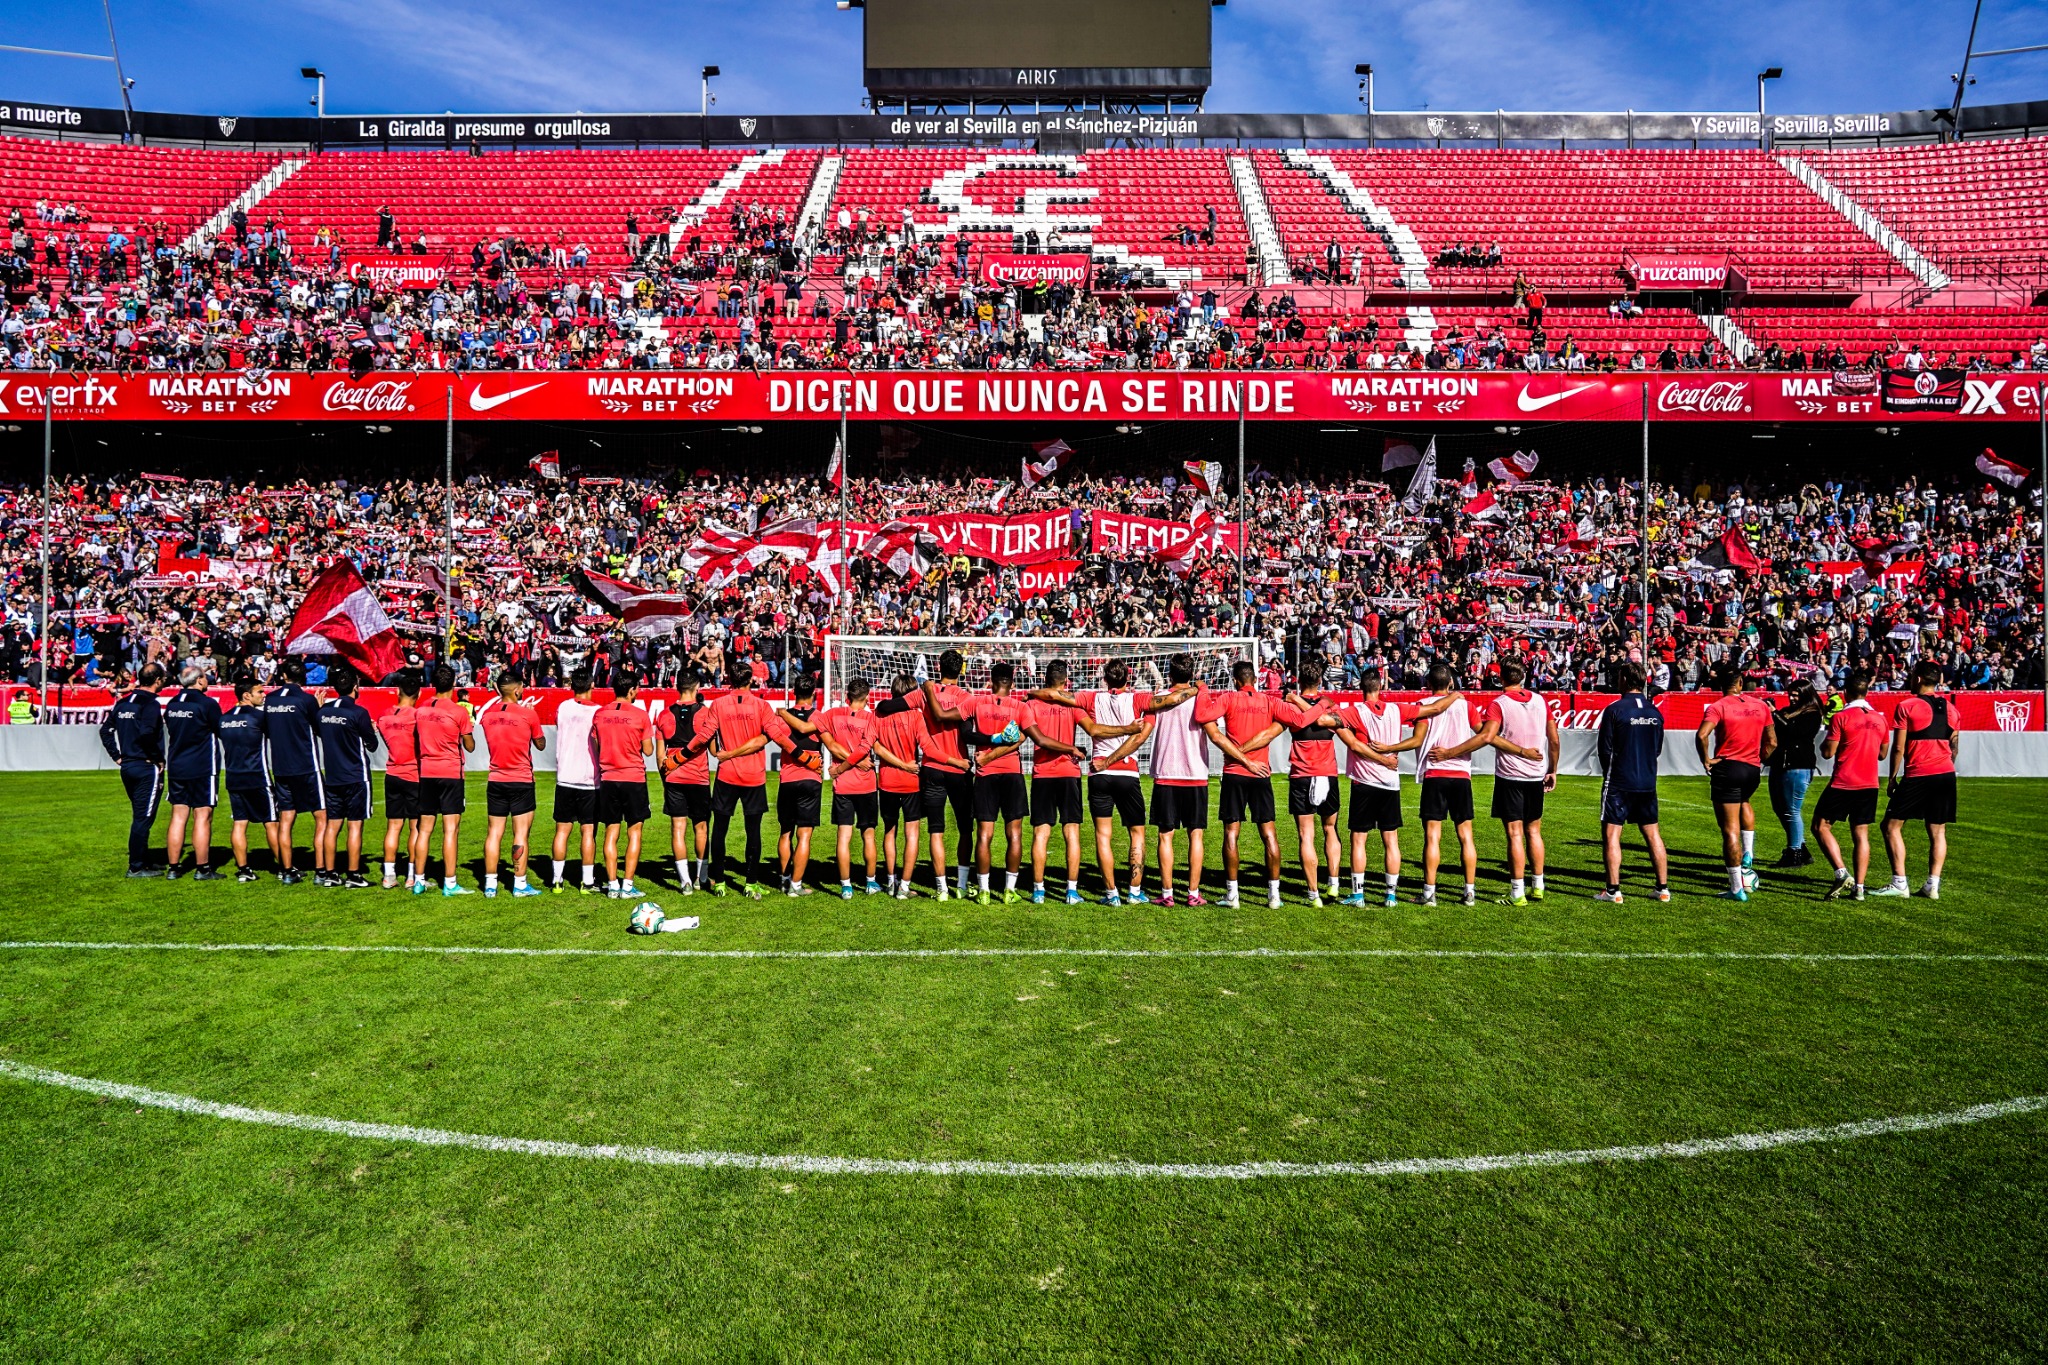 Sevilla FC to have open training session on 2nd January